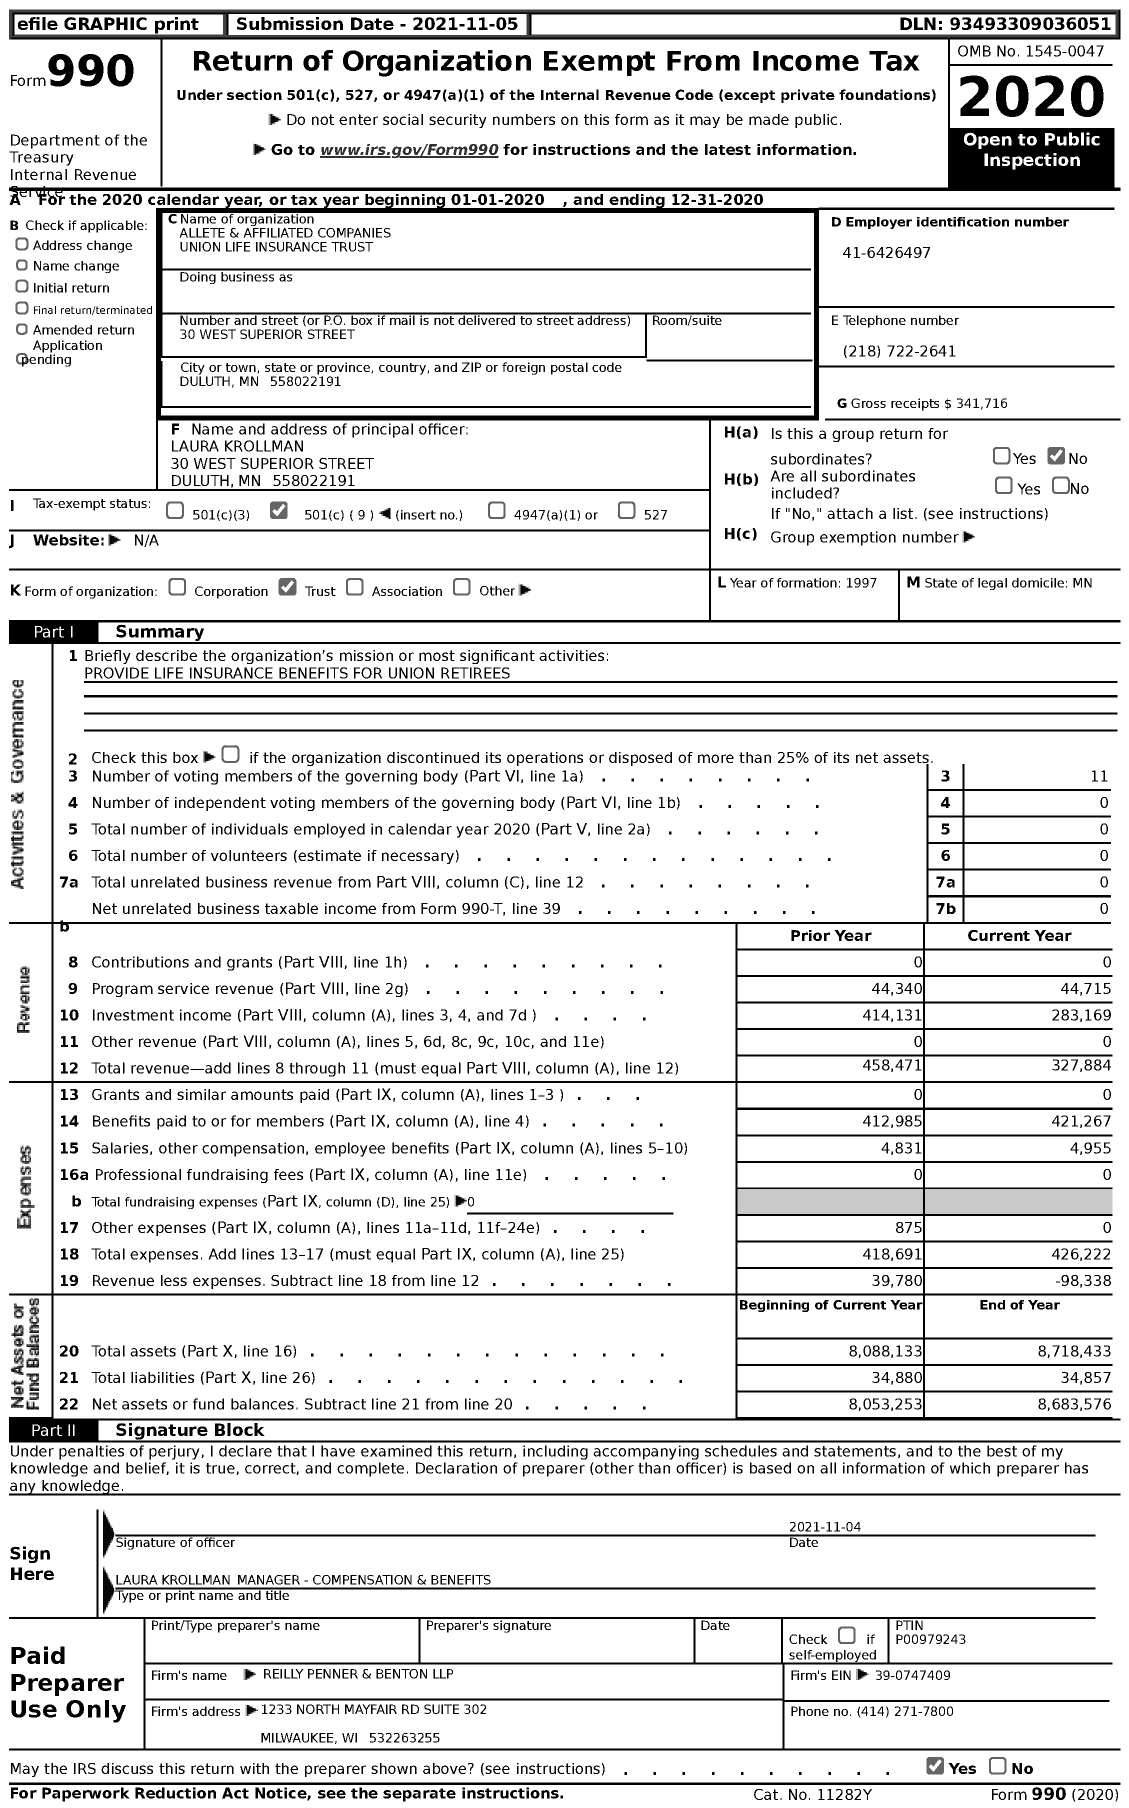 Image of first page of 2020 Form 990 for Allete and Affiliated Companies Union Life Insurance Trust